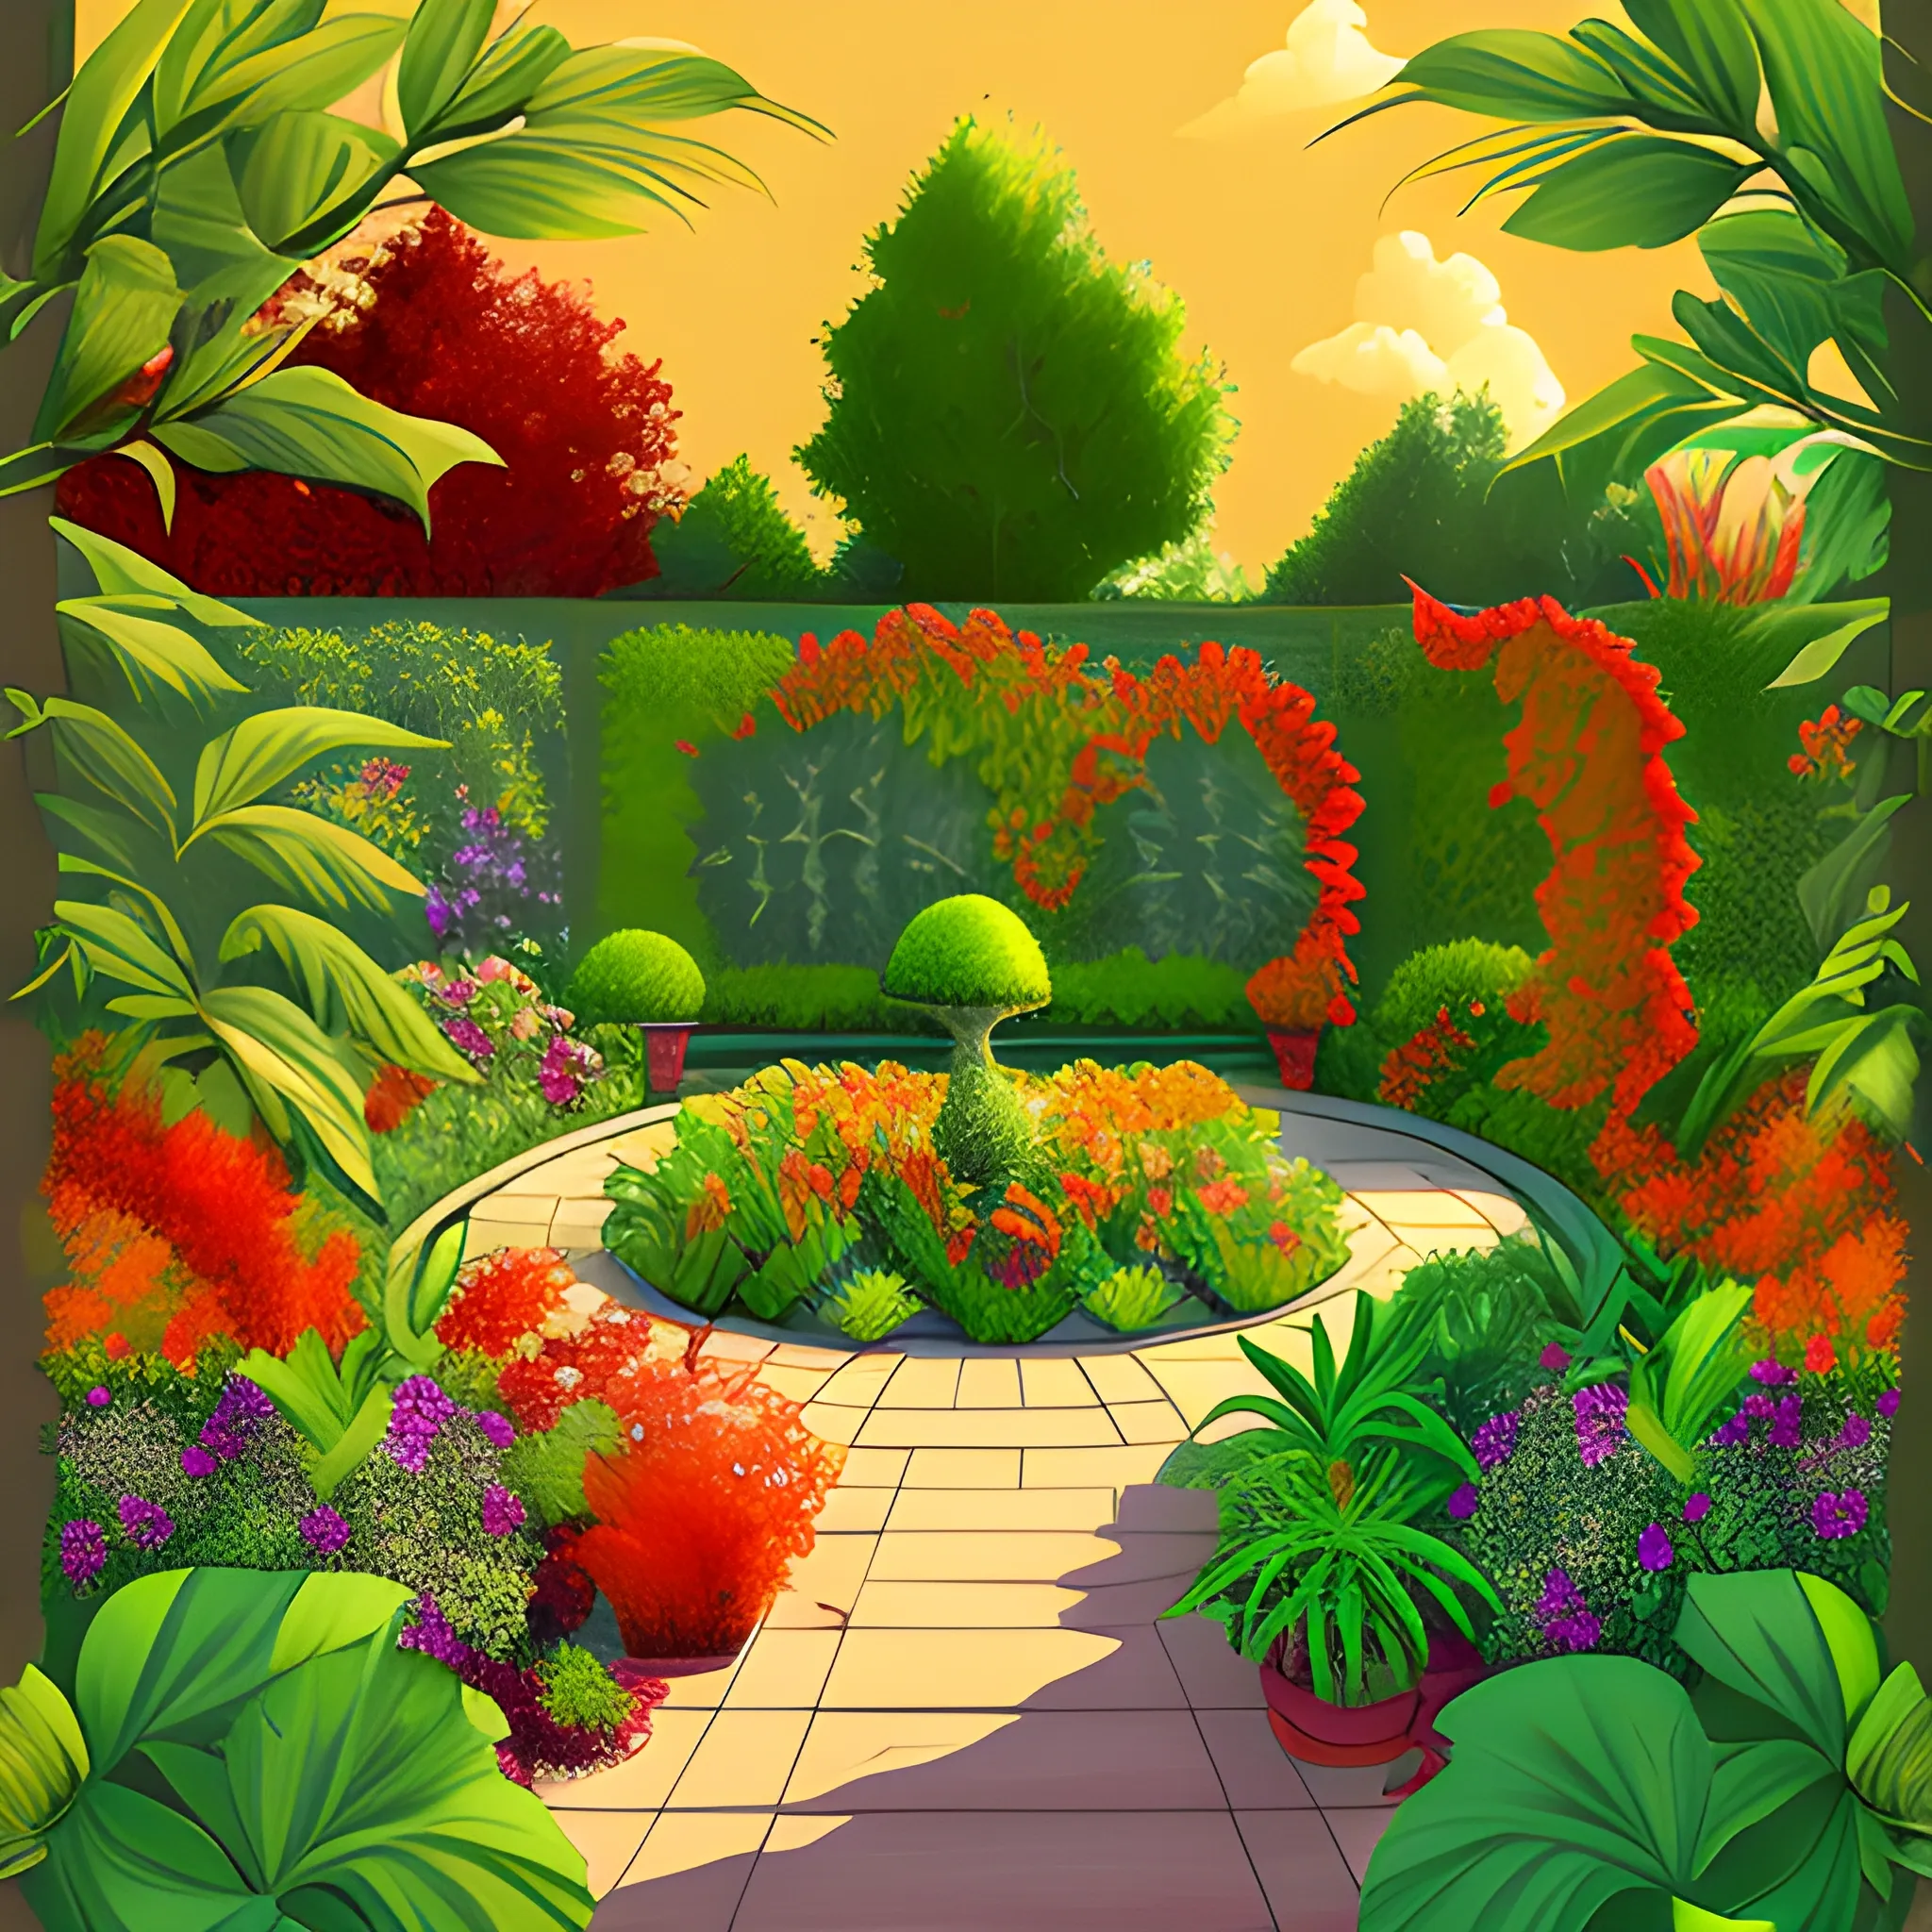 garden with very large leafy plants in digital painting style with warm colors